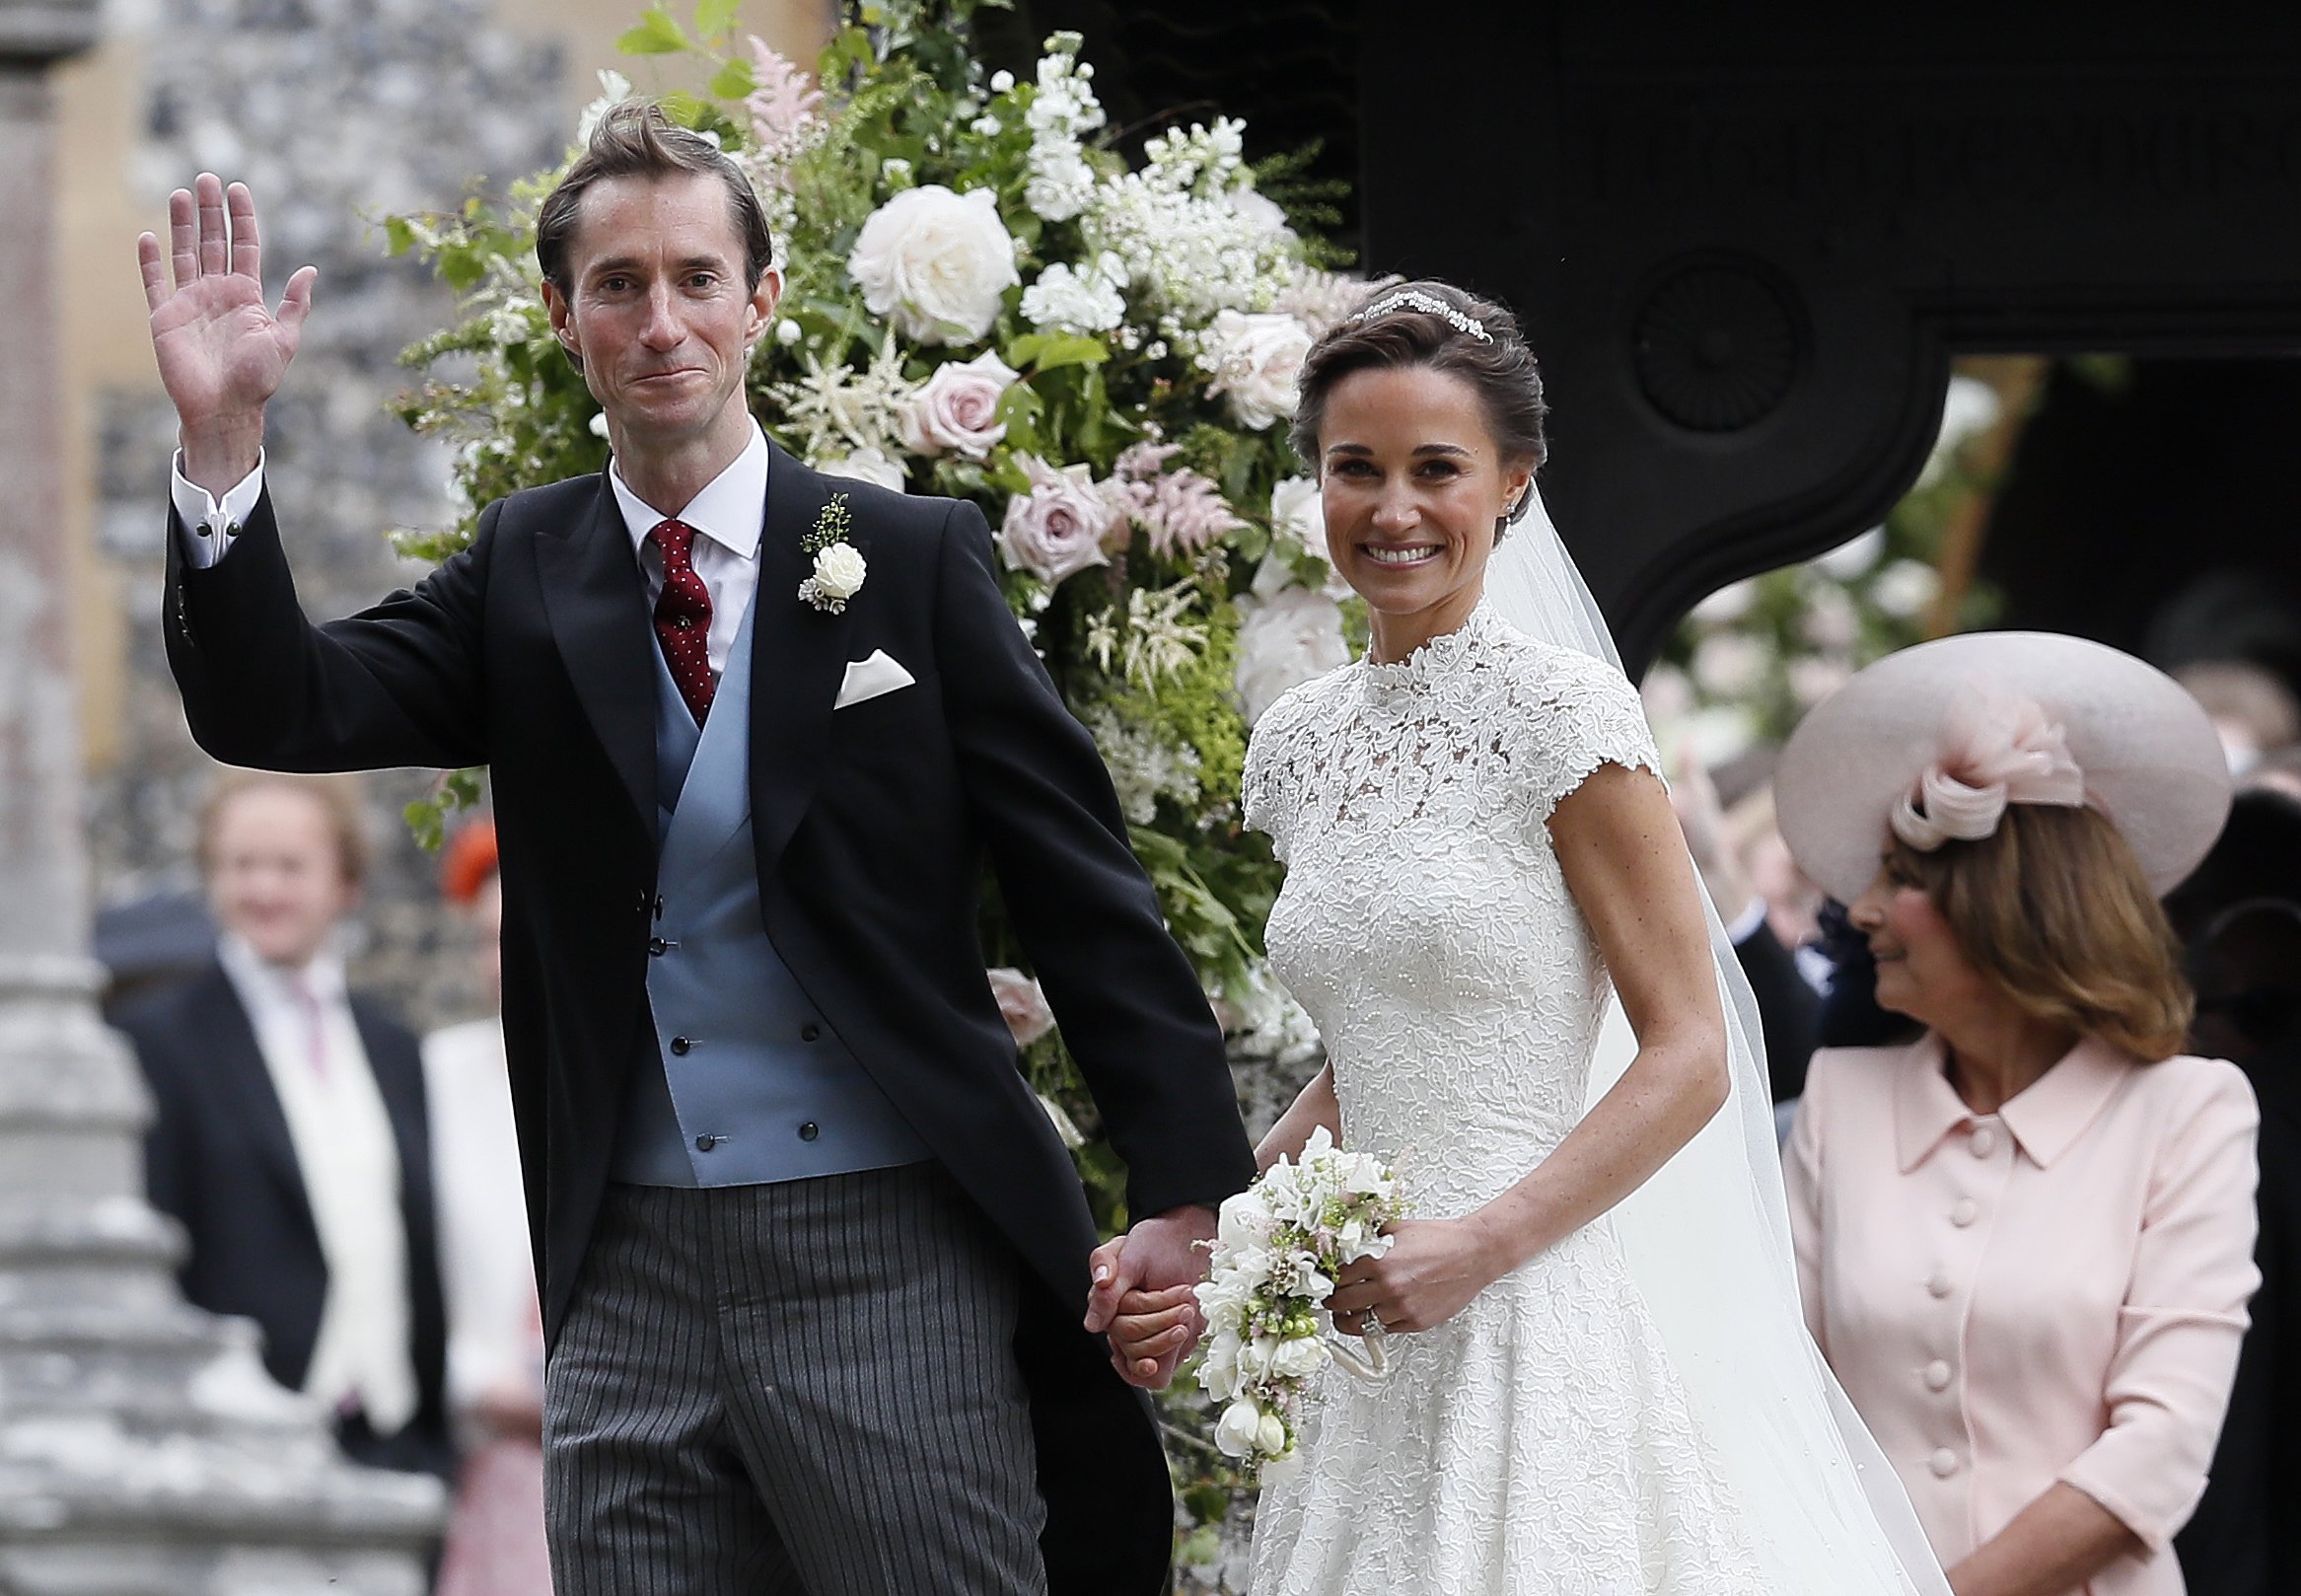 Pippa Middleton and her husband James Matthews at their wedding Englefield 2017. | Source: Getty Images 